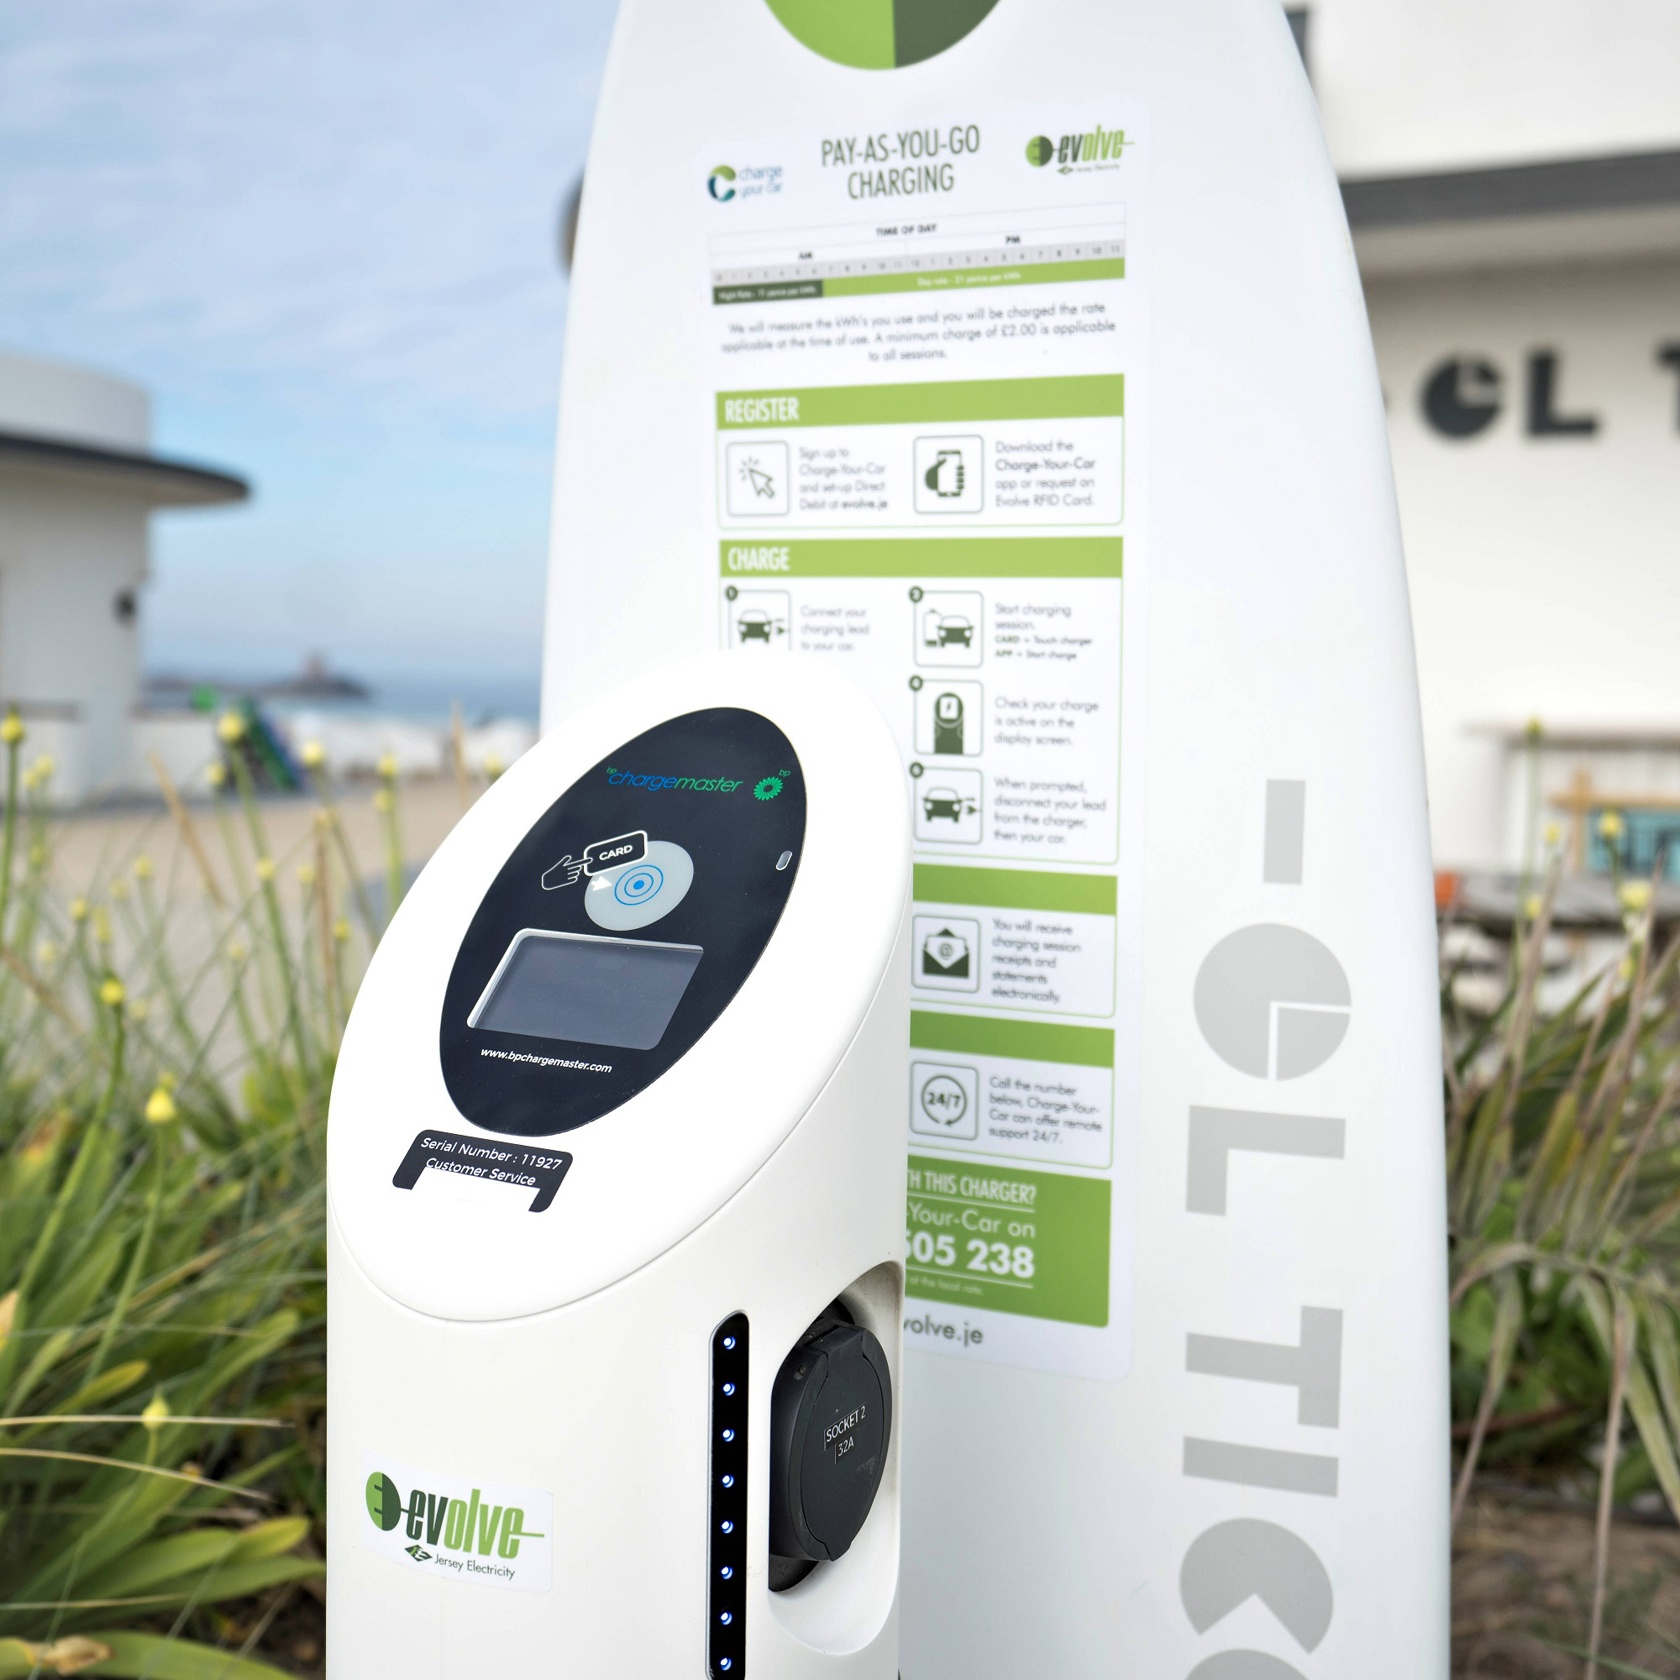 The electric vehicle charge at El Tico